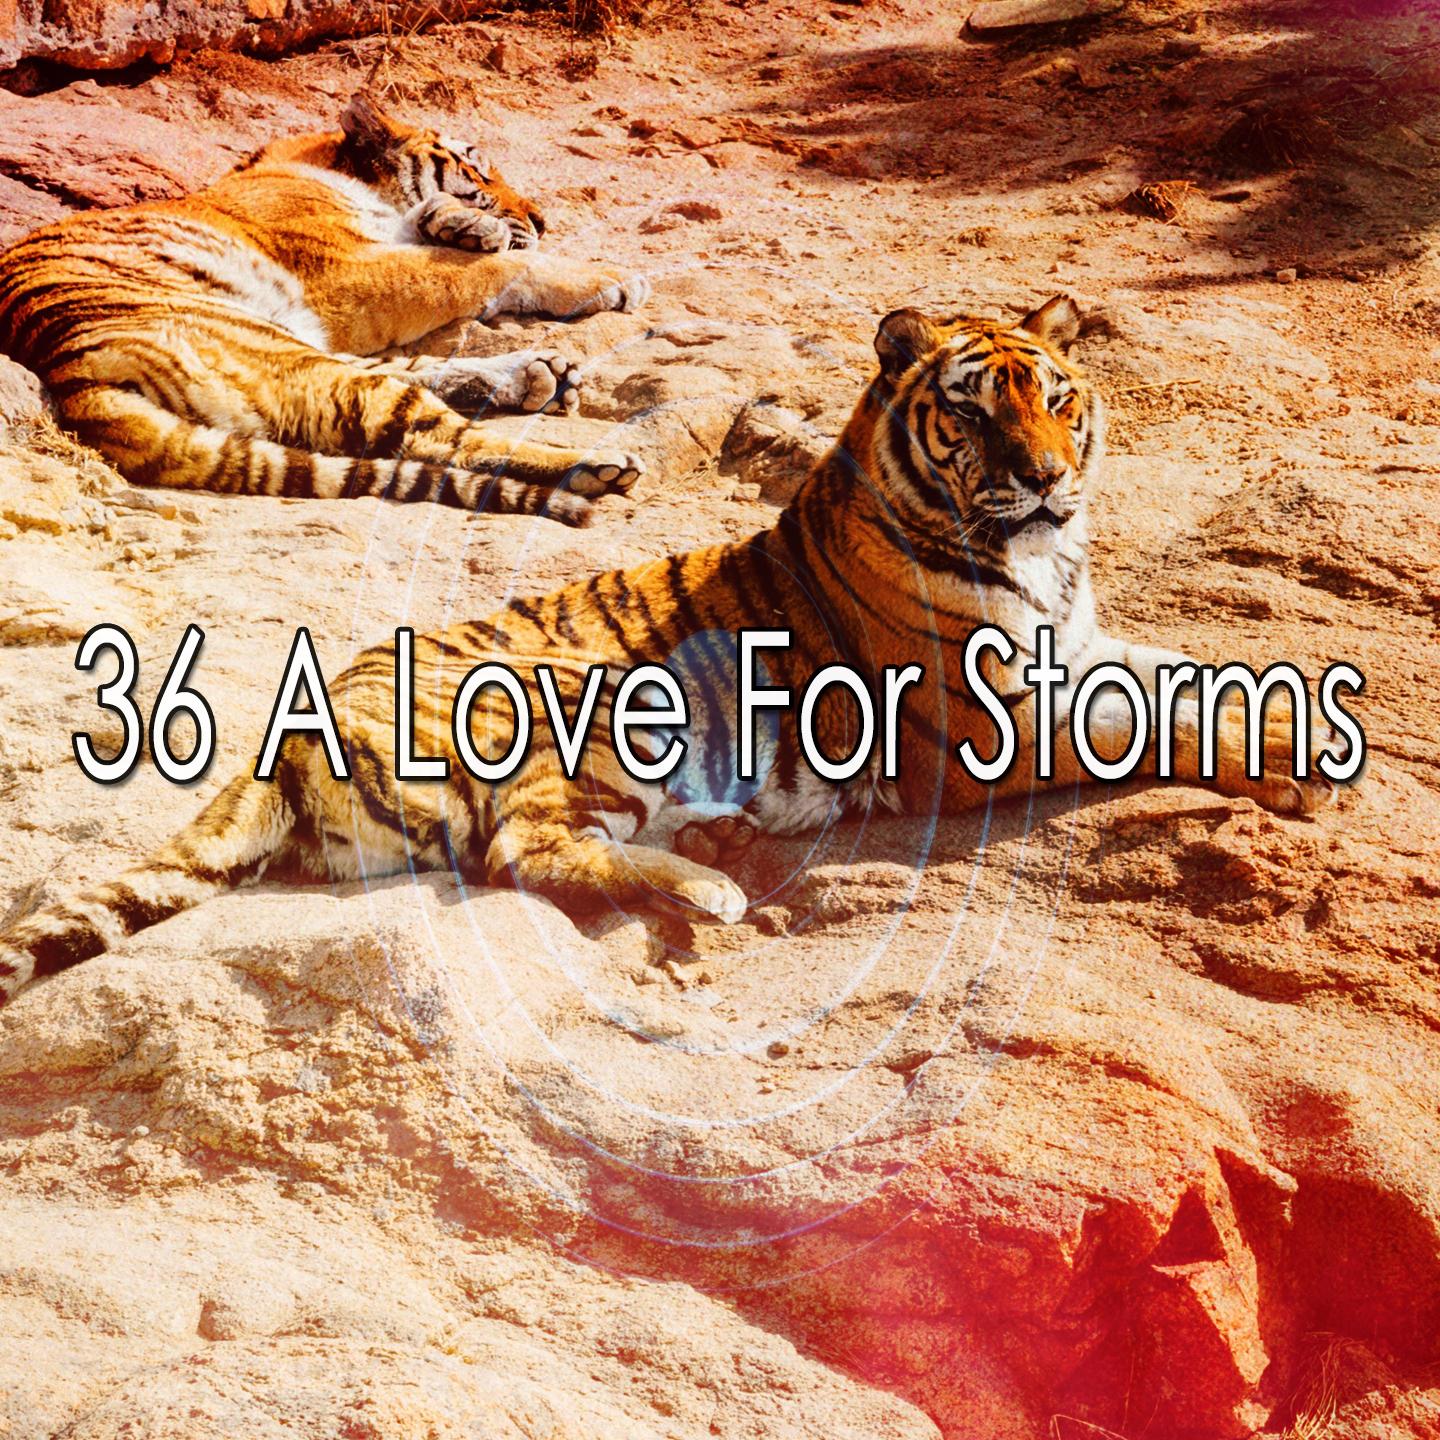 36 A Love for Storms